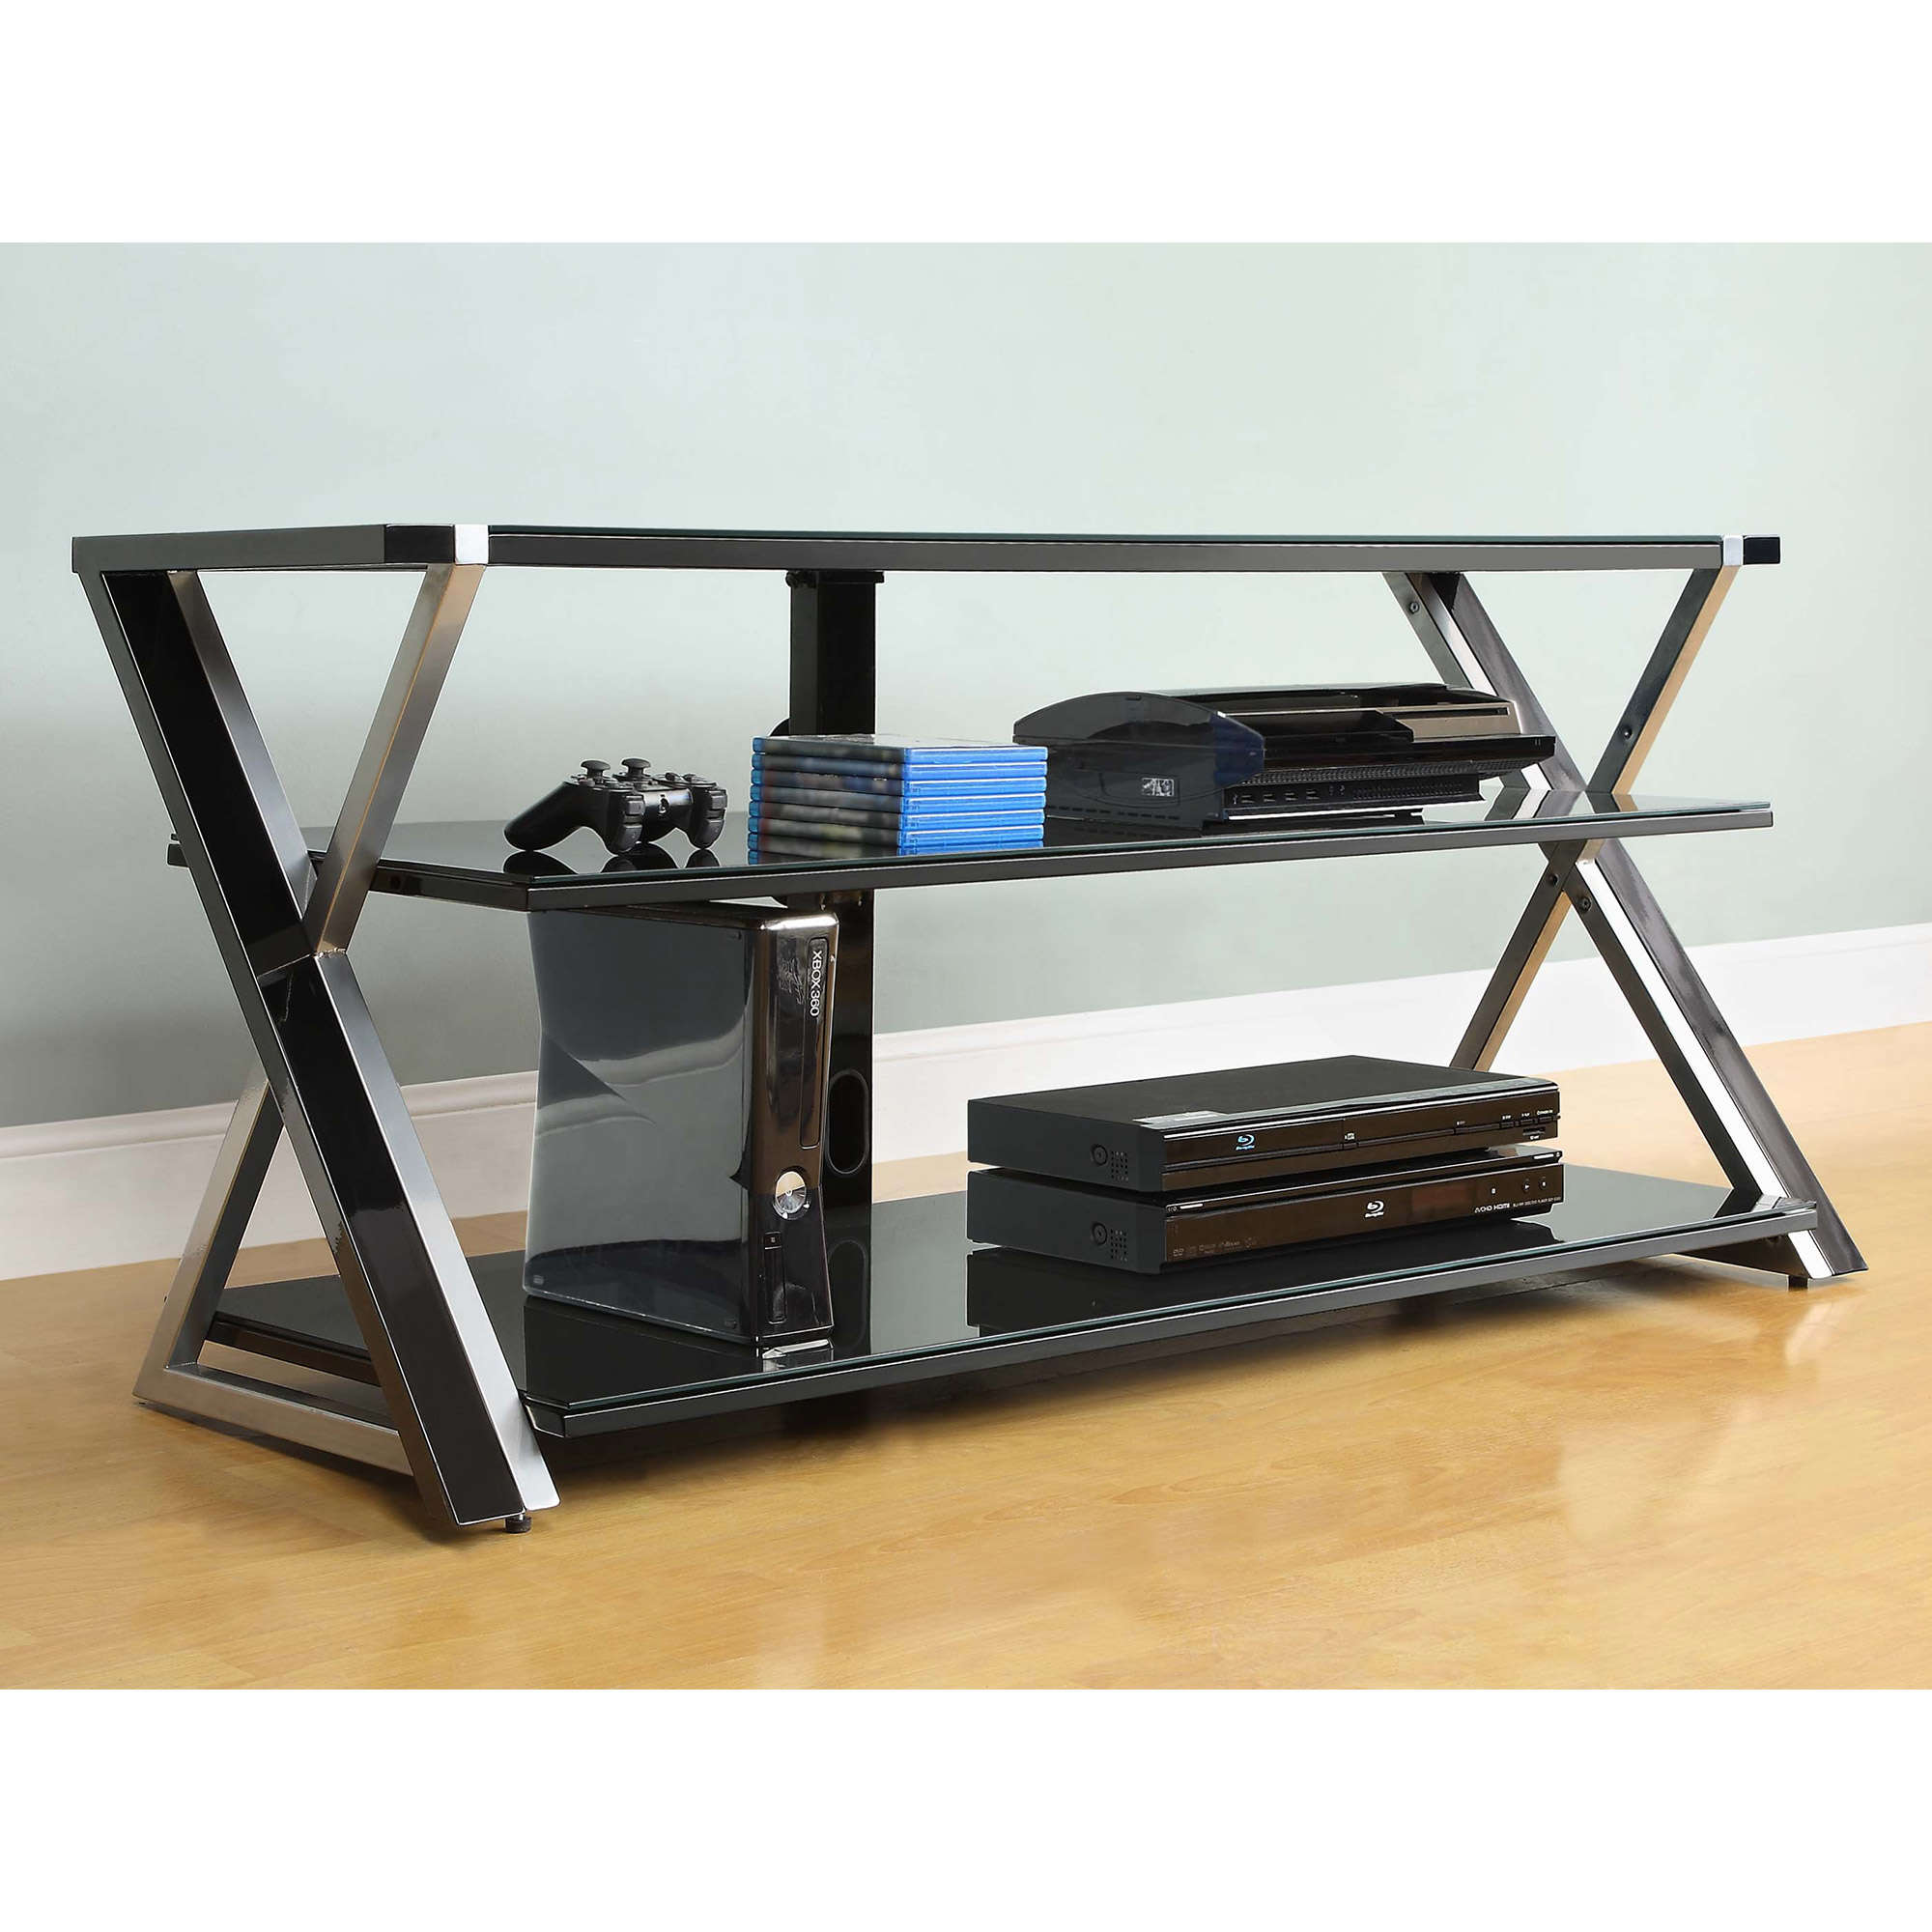 Whalen 3-in-1 Black TV Console for TVs up to 70", Black Glass Shelves - image 5 of 10